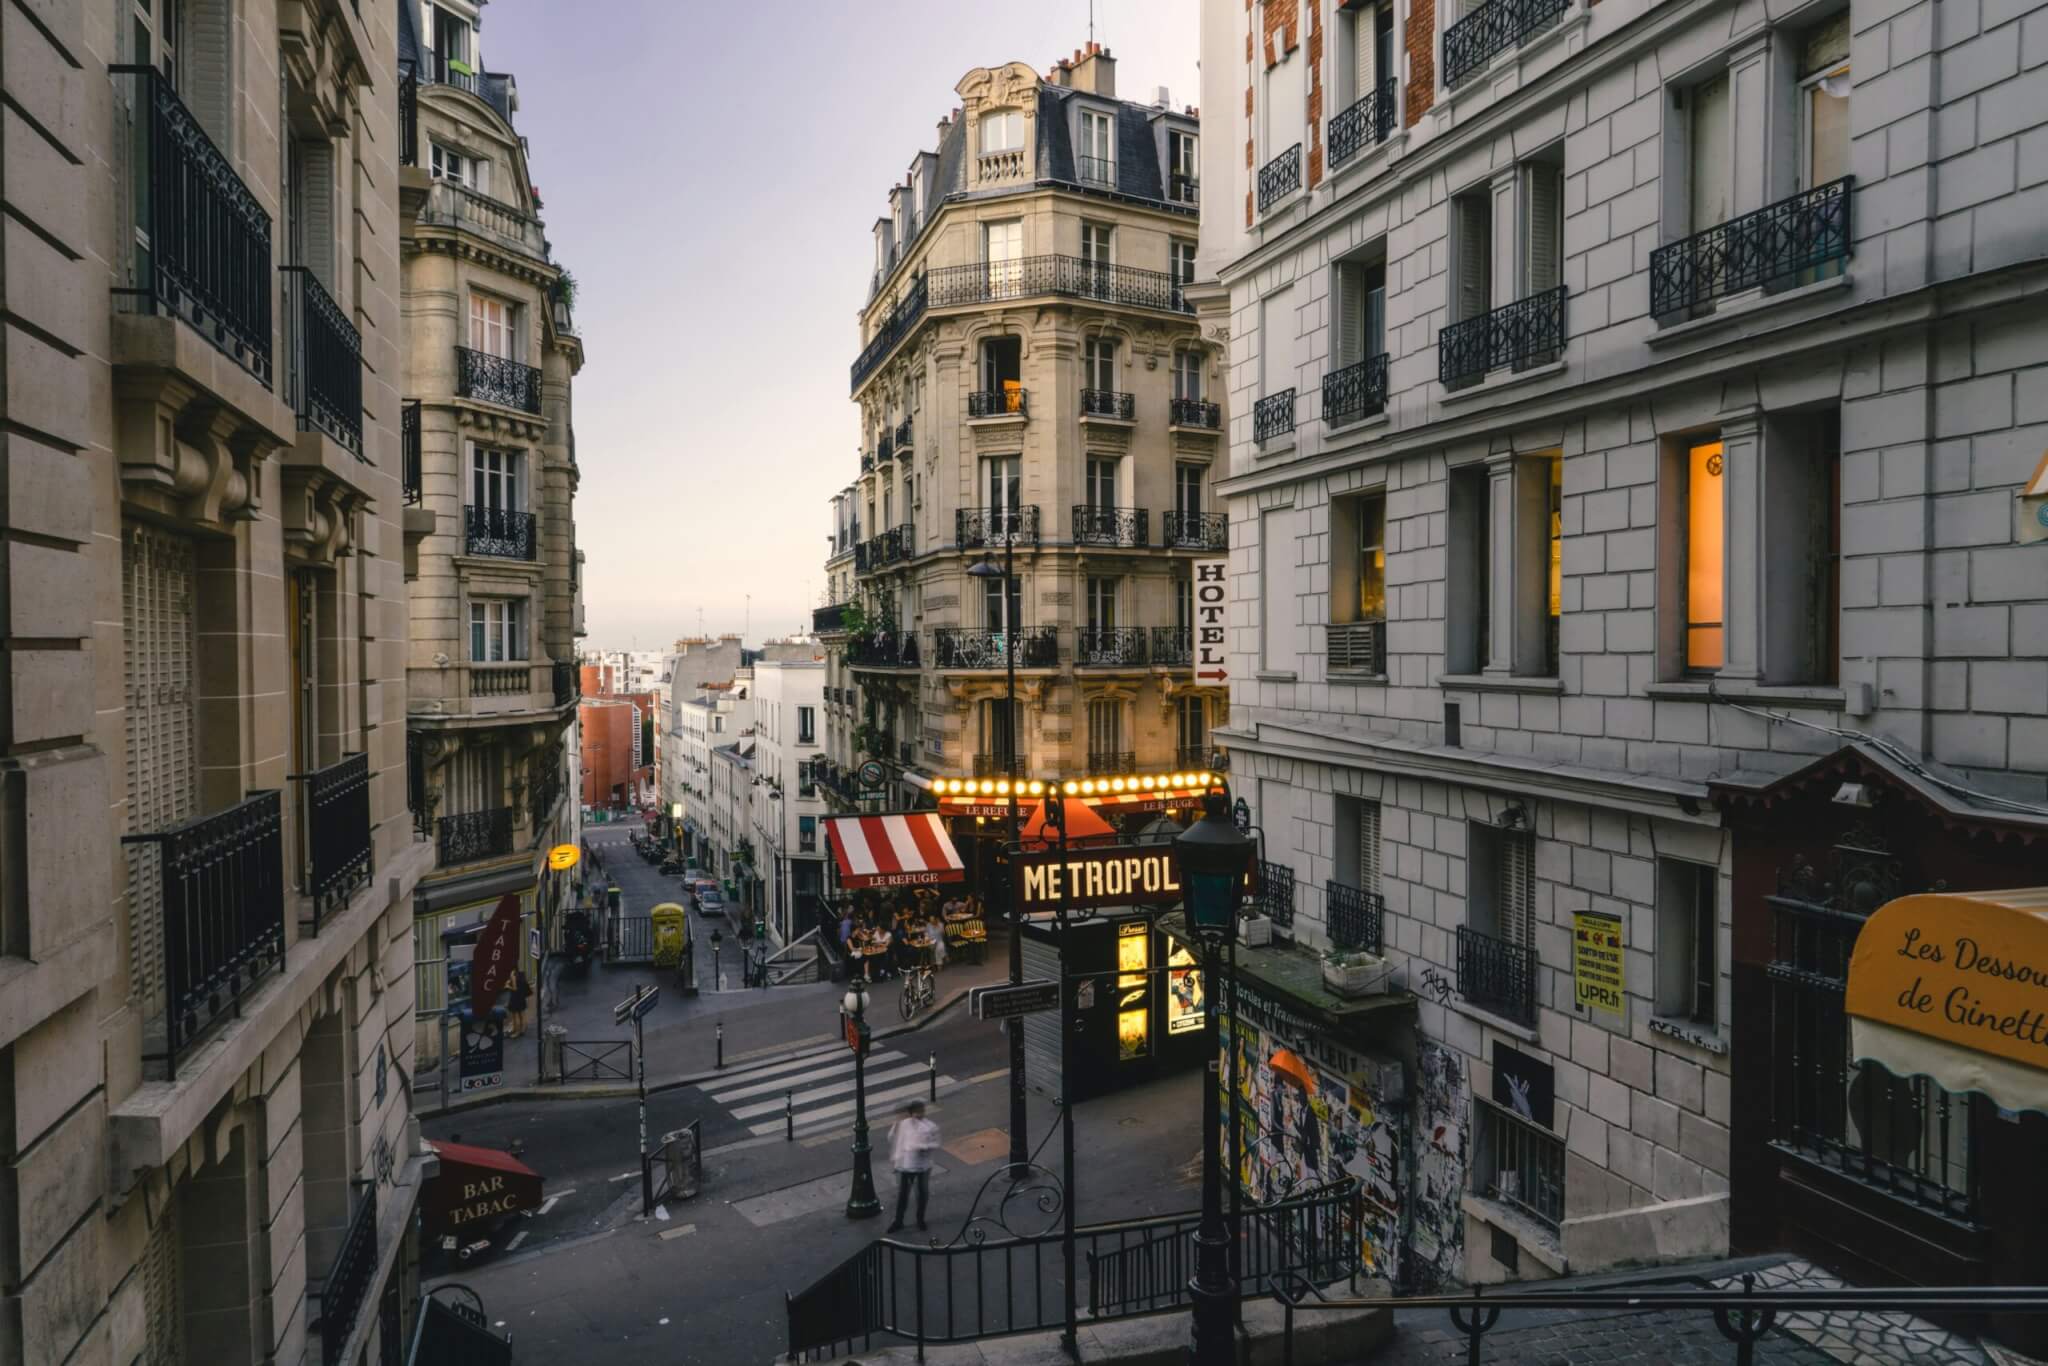 <p>They say our 40s is the decade we really come into our own. Throughout our 20s, we're mostly finding our way in life. In our 30s, we're finally starting to settle down. For 40th birthday vacation ideas, though, it has to be a sophisticated European getaway. </p> <p>Paris isn't only for lovers. It's for your gorgeous group of girlfriends, too. You'll have plenty of options in terms of Airbnbs in the Latin Quarter, Le Marais, and Montmartre. </p> <p>Depending on how many girls are going and how many ways you can split the bill, you might even up the ante with a luxurious 5-star stay at The Ritz or the <a href="https://en.hotelducollectionneur.com/">Hôtel du Collectionneur</a> near l'Arc de Triomphe. </p> <p>For more on what to do during your stay, whether it's with your gal pals or your lover, check out our travel guide to <a href="https://travelreveal.com/destination-guides/3-days-in-paris/">3 Days in Paris</a>. We'll walk you through the benefits of a museum pass, must-see historical marvels, and a few artistic explorations. </p>